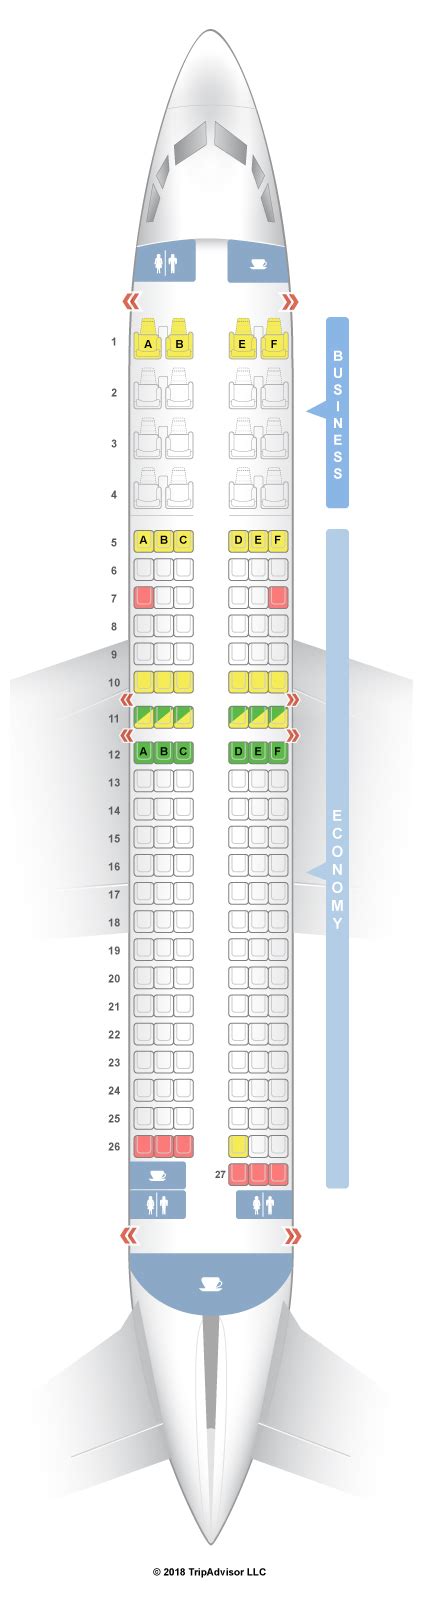 turkish airlines boeing 737-800 seat map